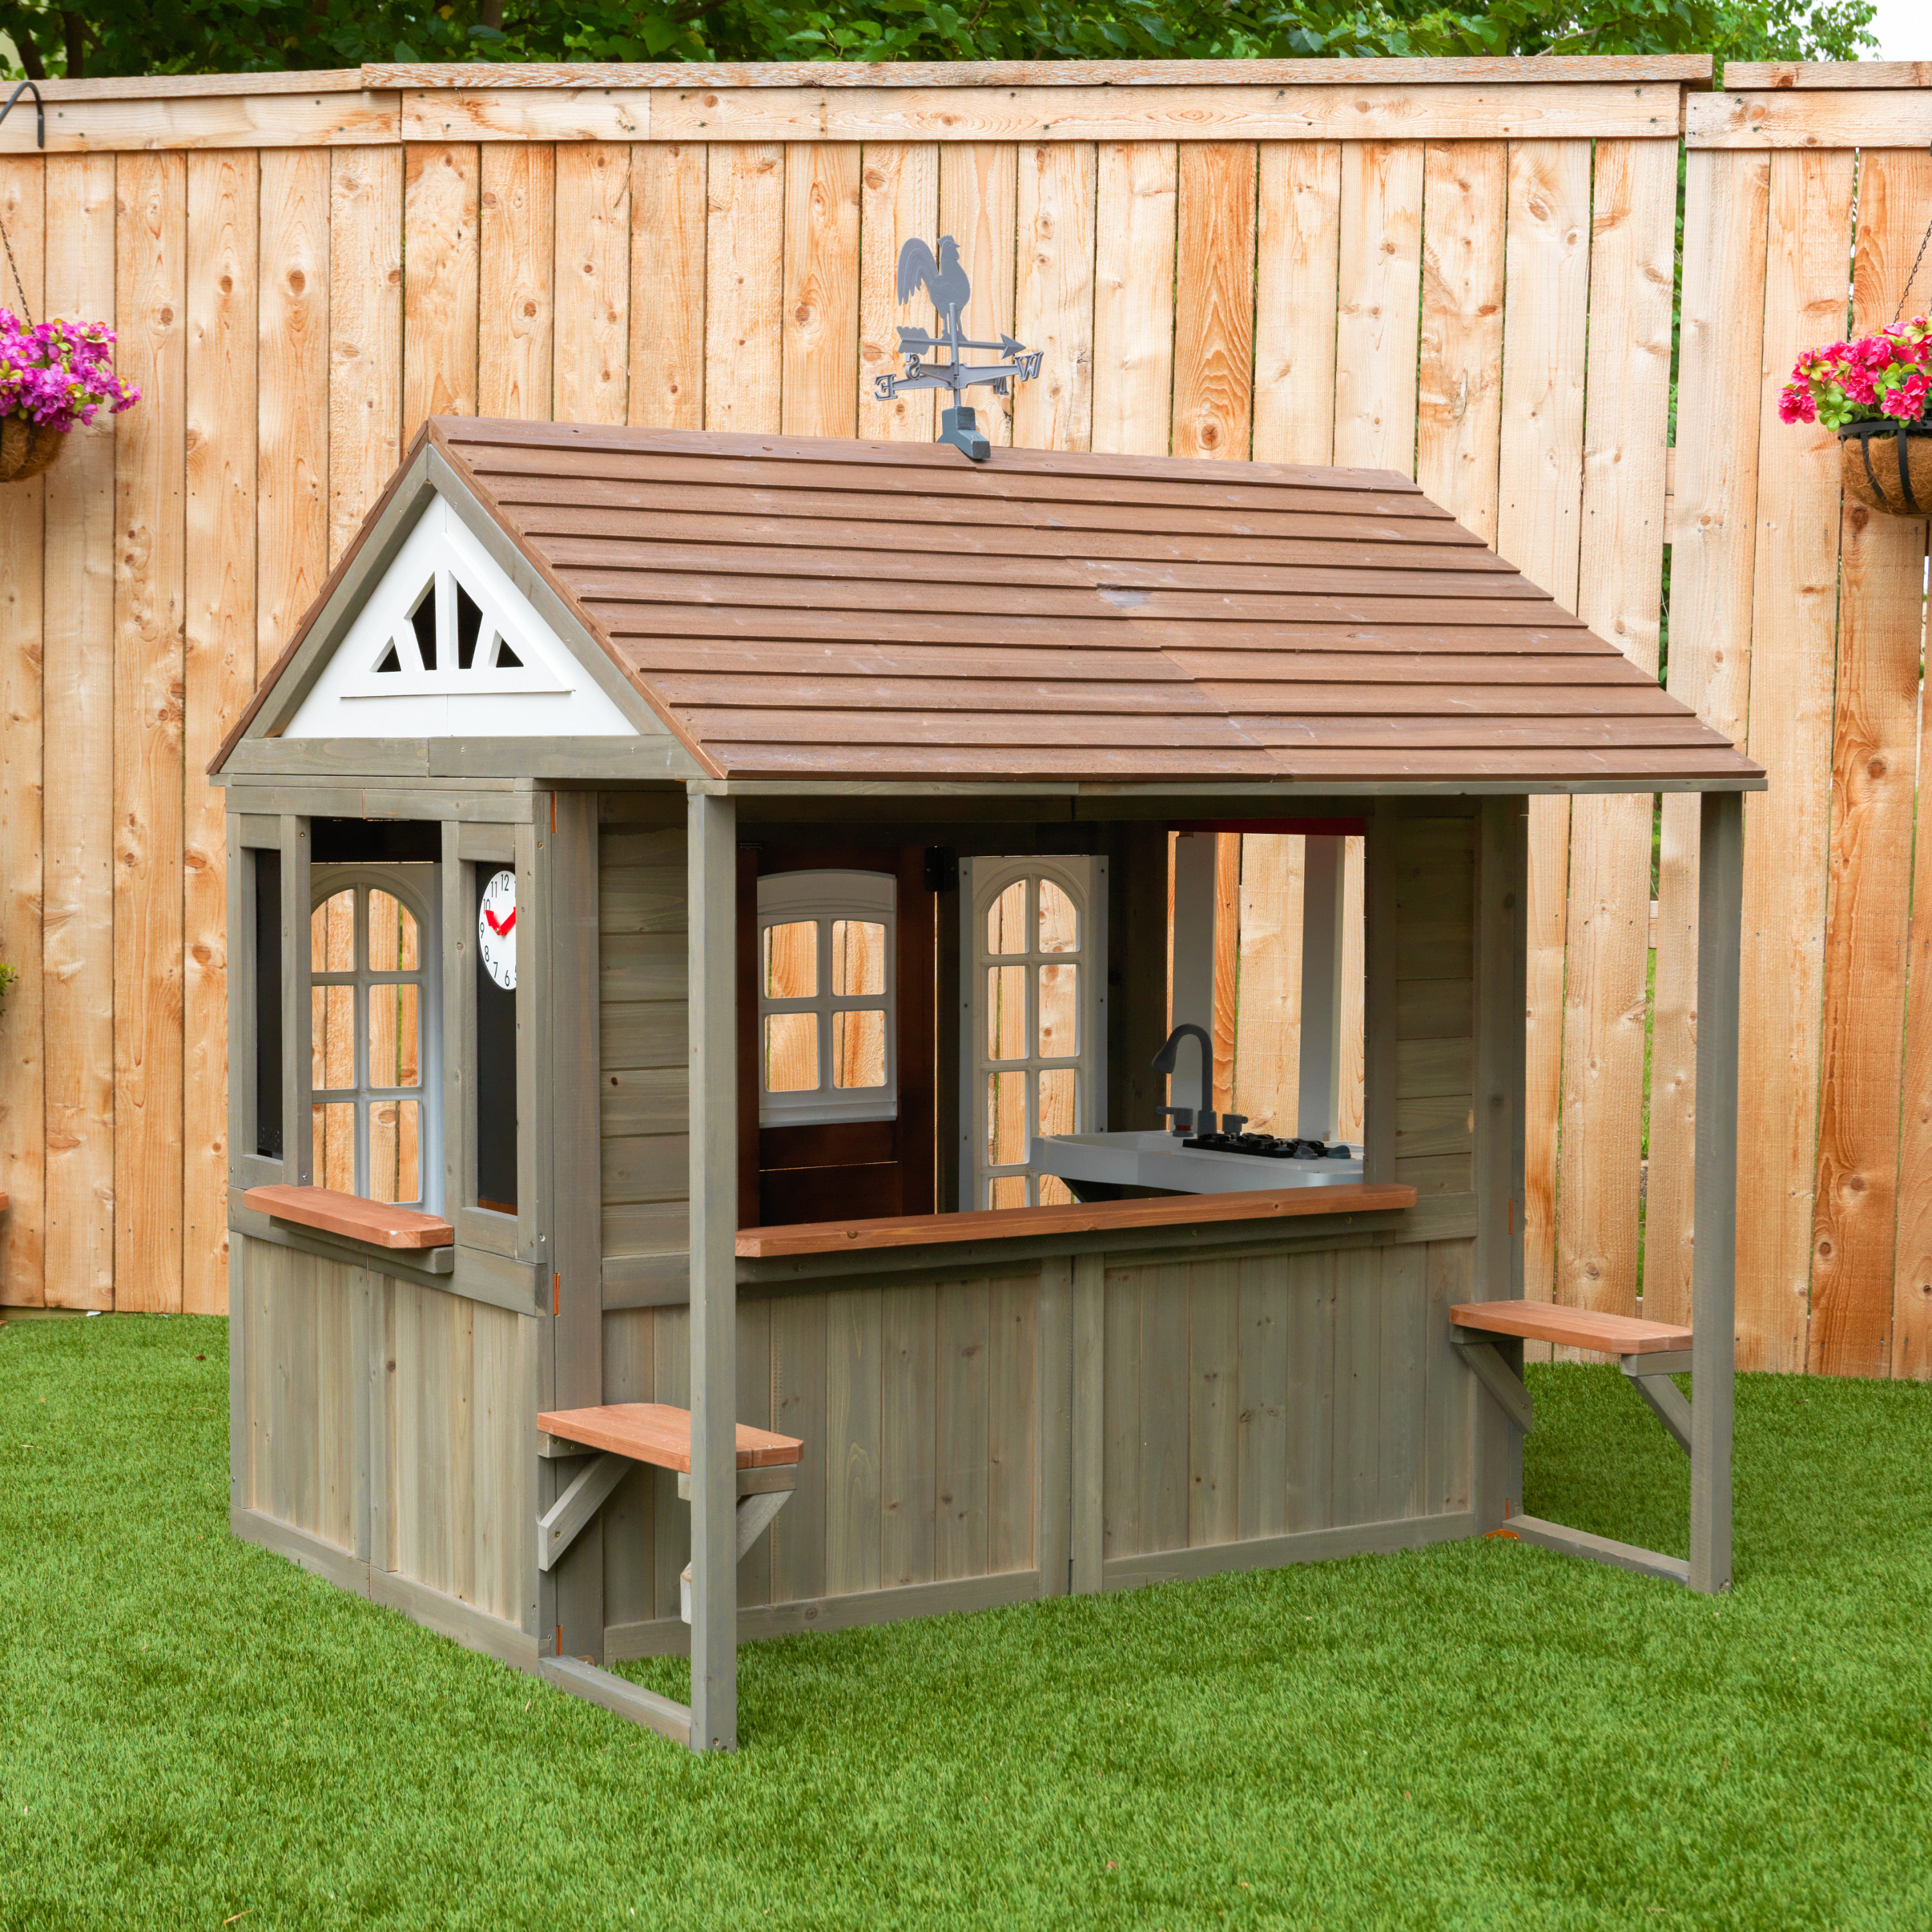 KidKraft Country Vista Wooden Outdoor Playhouse with Double Doors, Play Kitchen & Benches - image 4 of 28